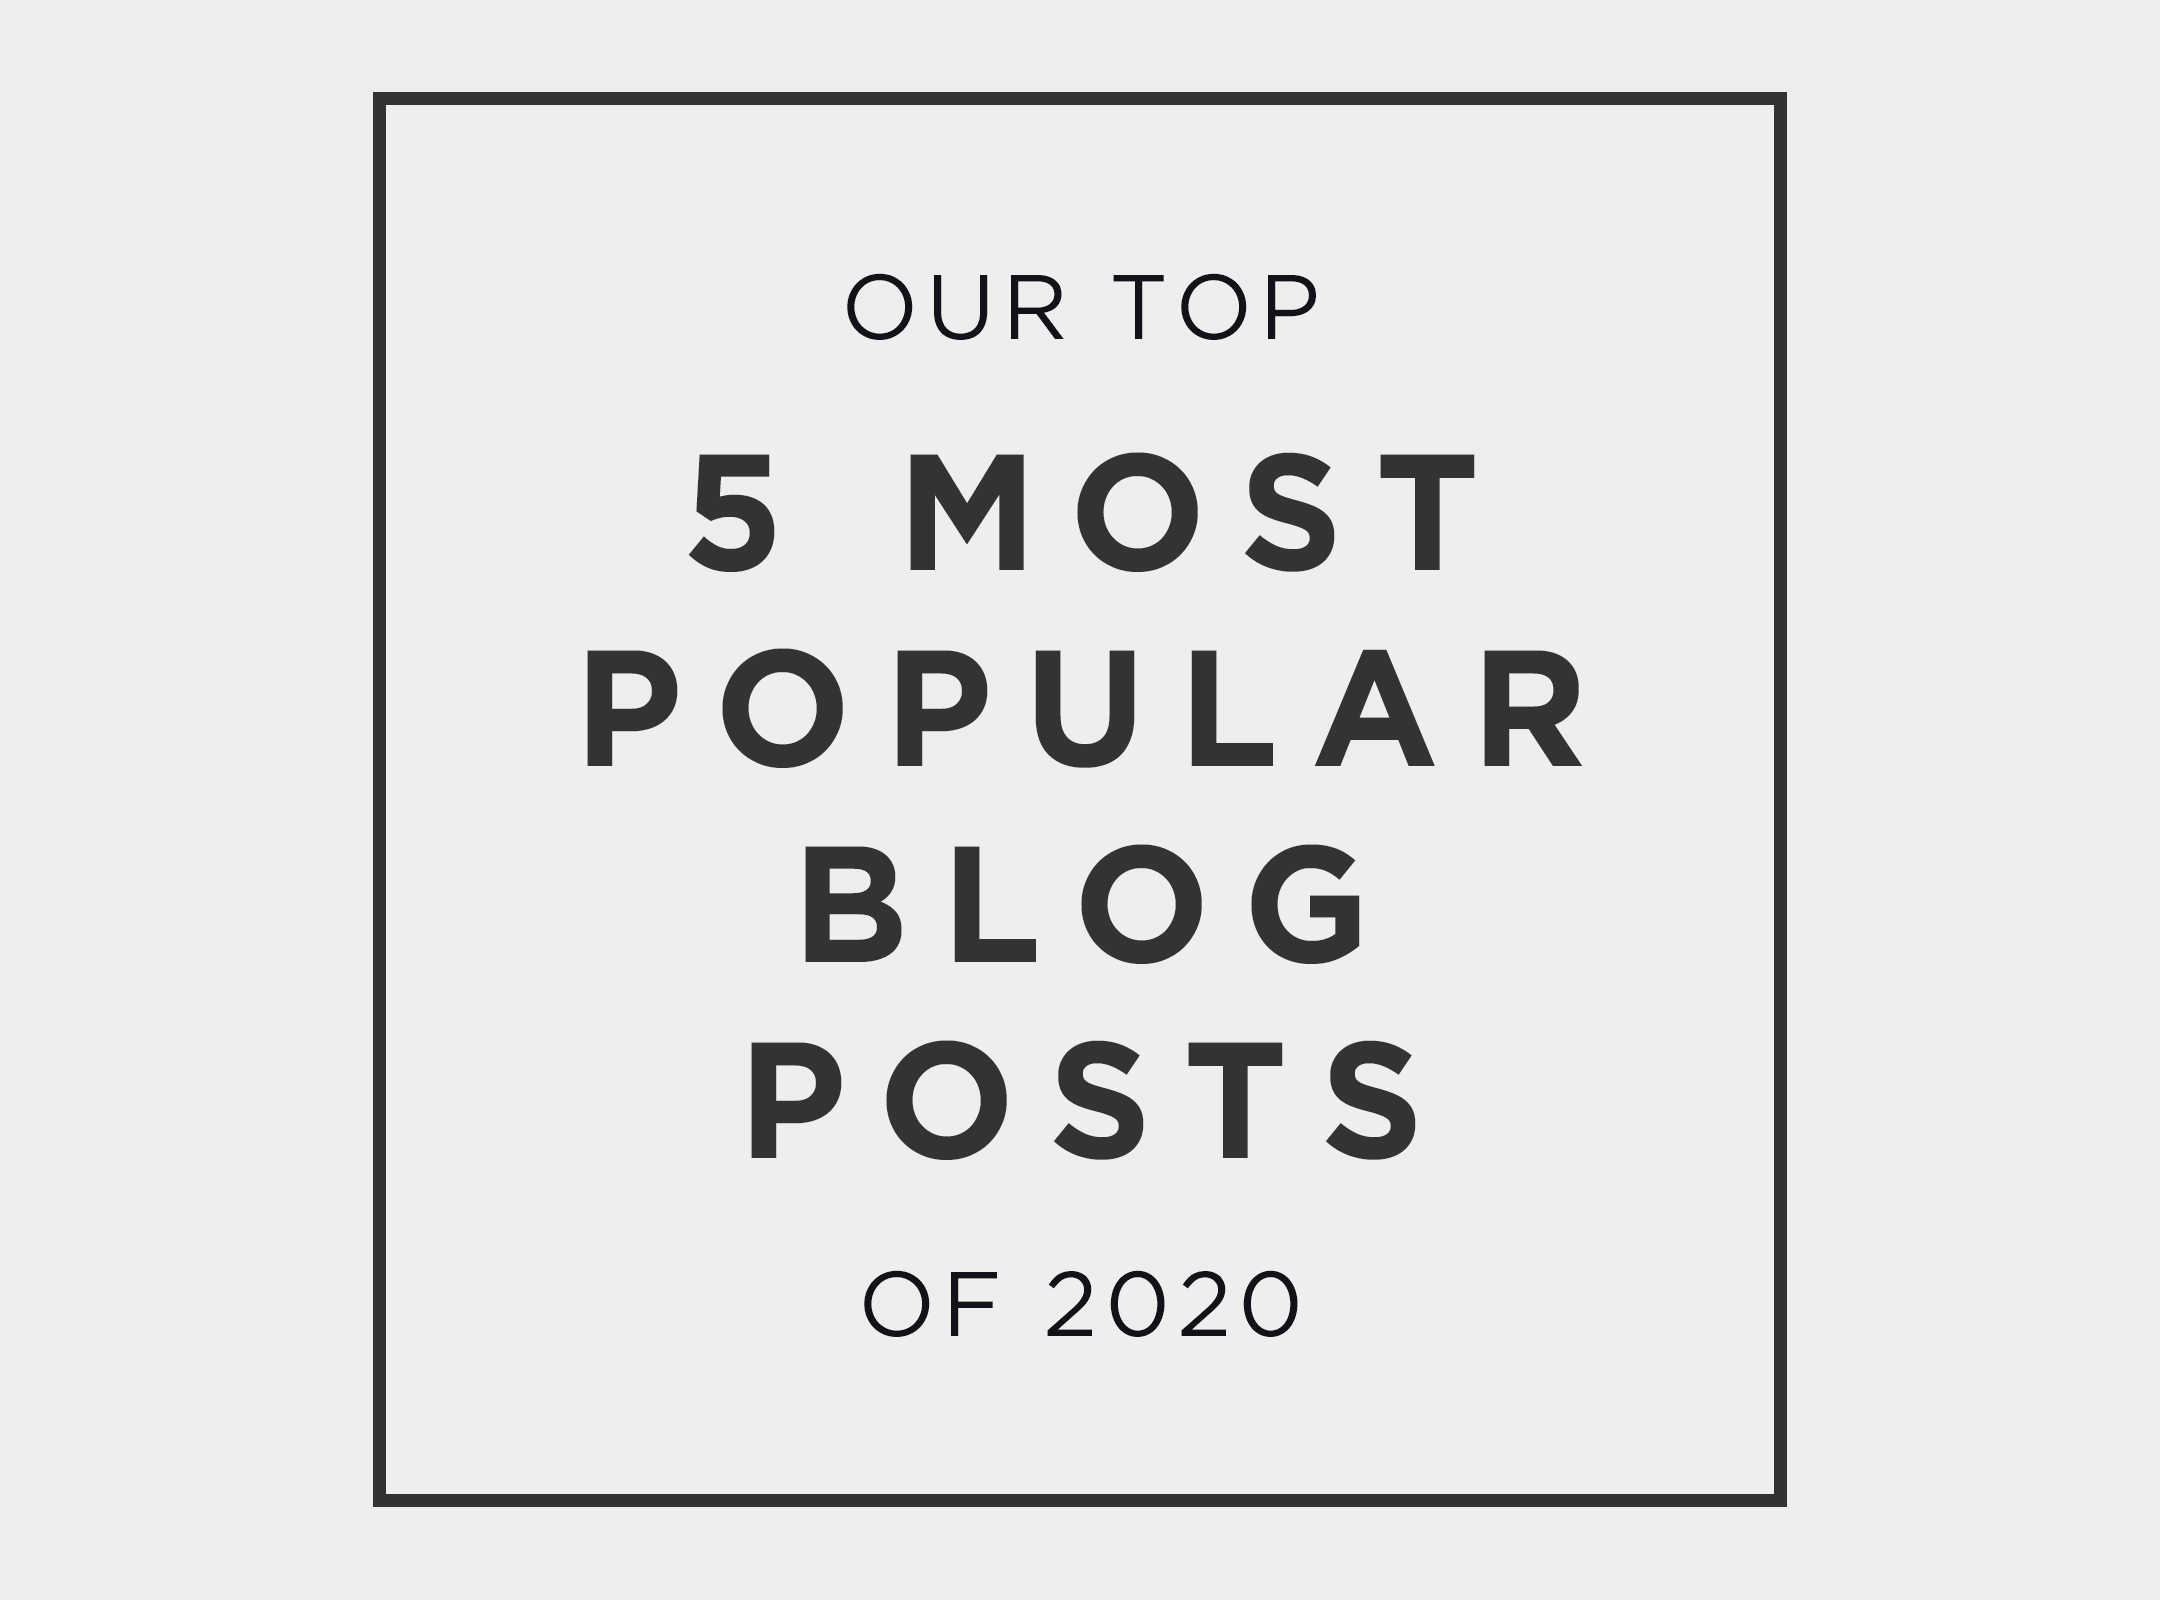 Our Top 5 Most Popular Blog Posts Of 2020